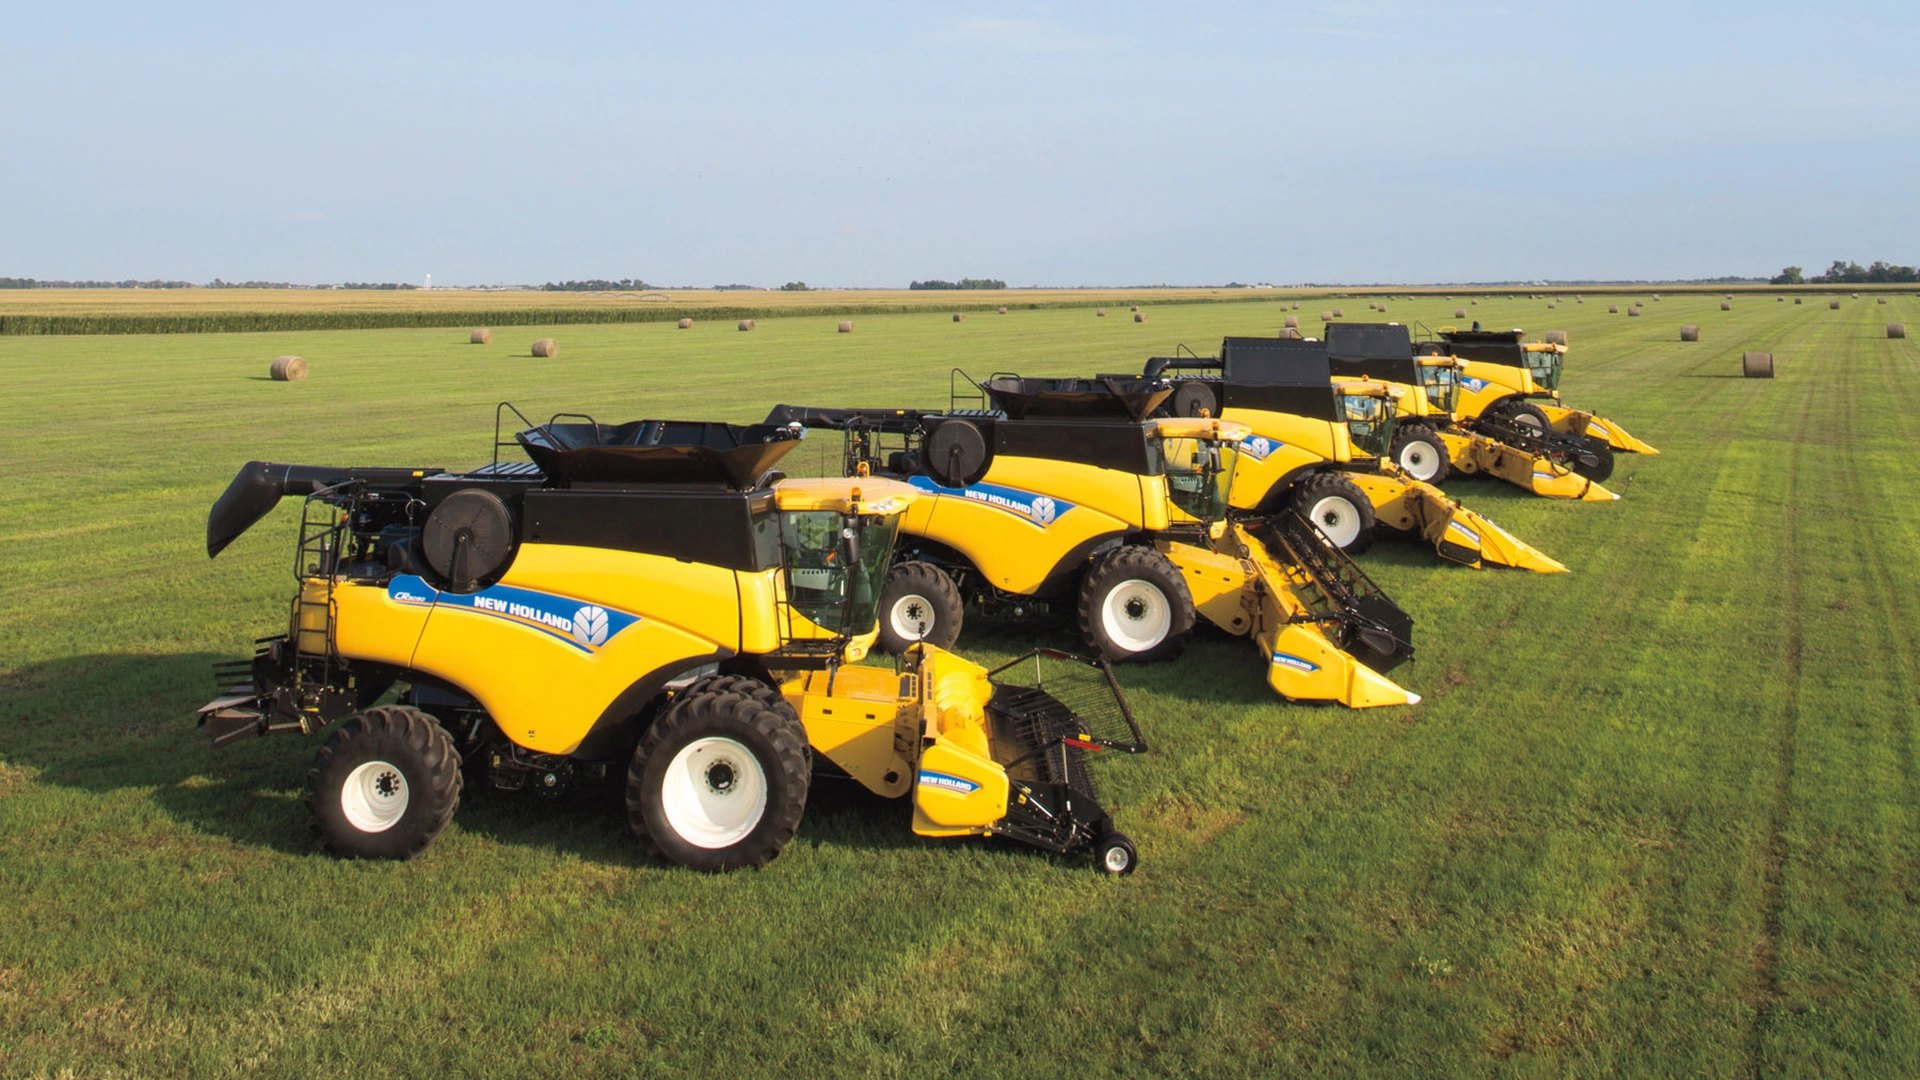 Line-up of New Holland combines in a field, showcasing various headers; vibrant yellow machines against a backdrop of green grass and open sky.